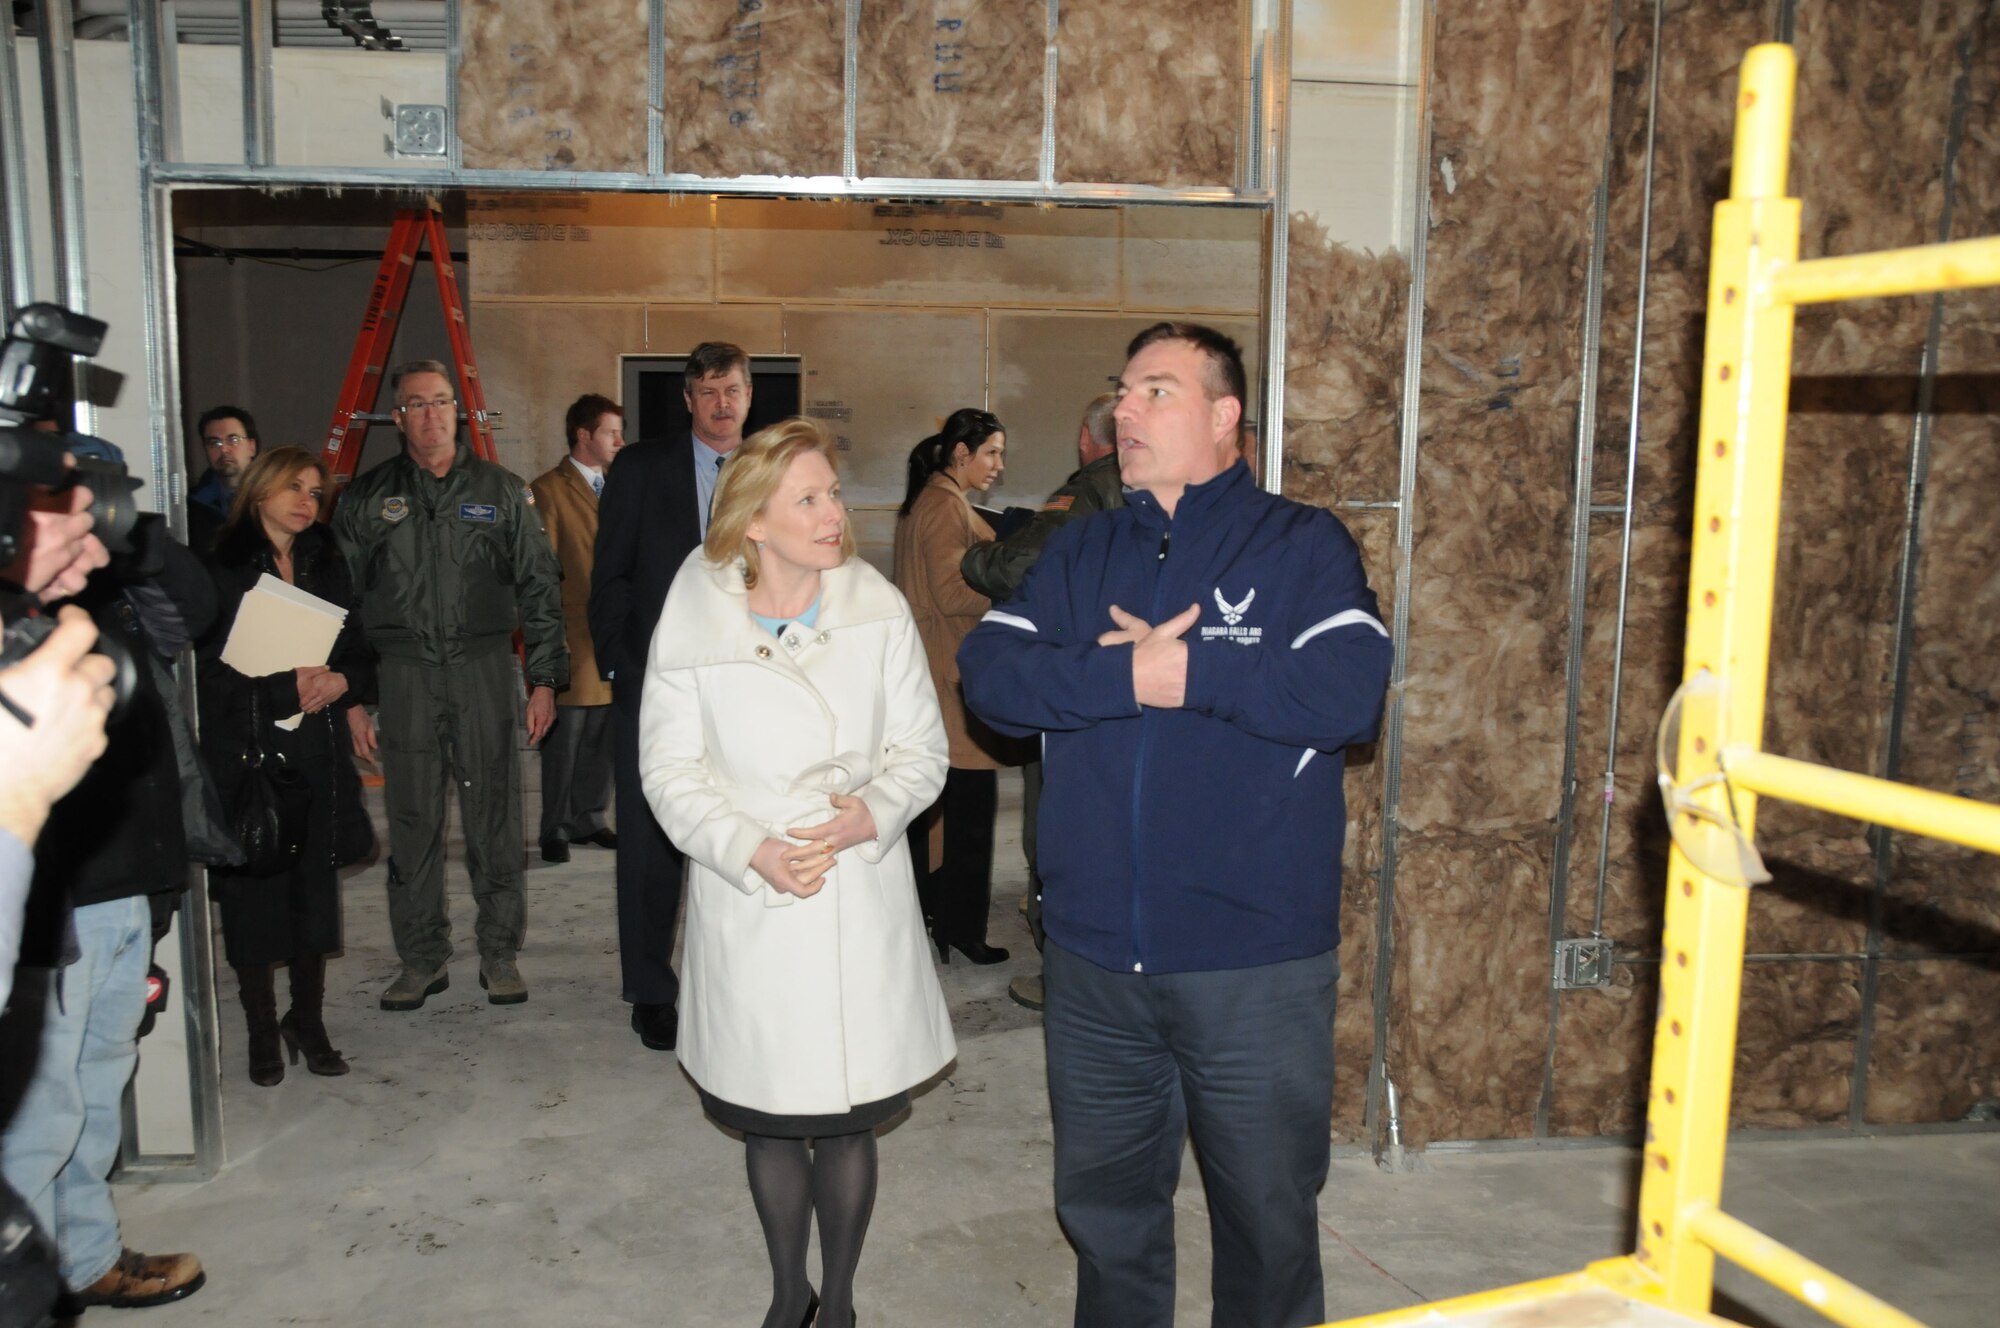 Mr. Michael Williams gives Senator Kirsten Gillibrand a tour of the Community Activity Center at the Niagara Falls Air Reserve Station March 25, 2011 Niagara Falls, NY. This building when completed will be the state of the art dining and meeting facility serving up to 800 airmen.(Air Force Photo/SMSgt Ray Lloyd)